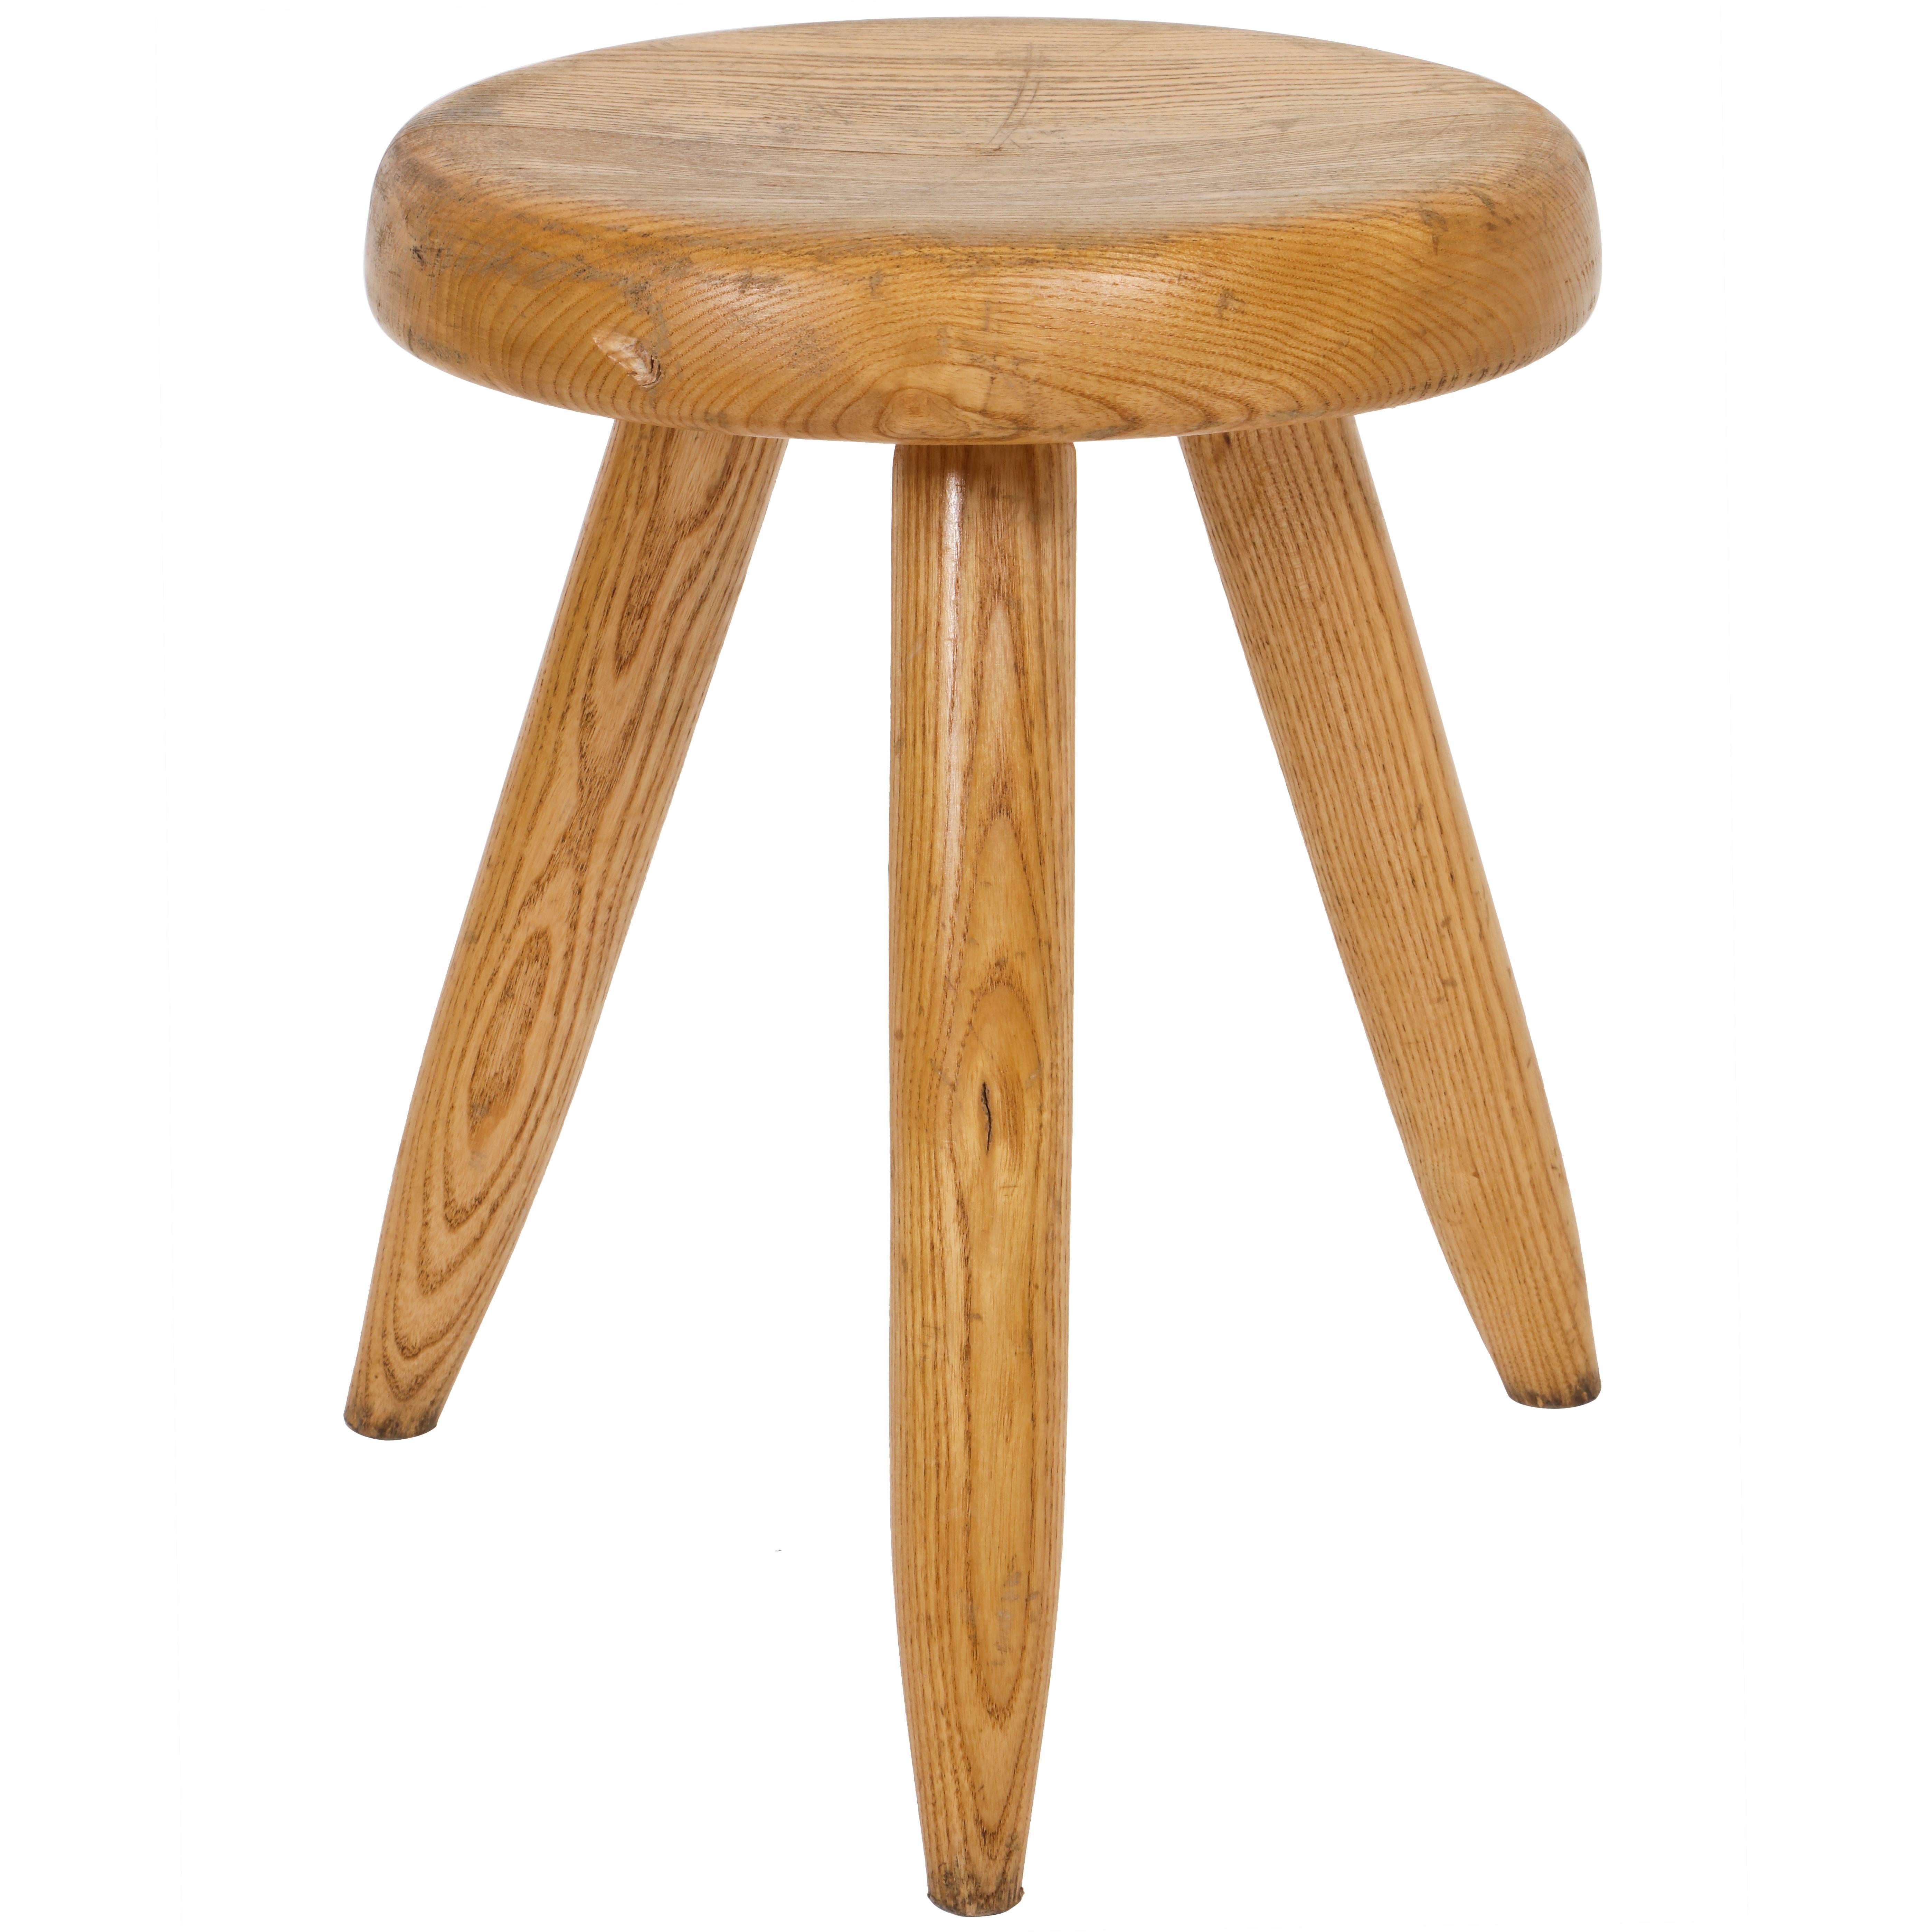 1950s Charlotte Perriand Wooden Stool